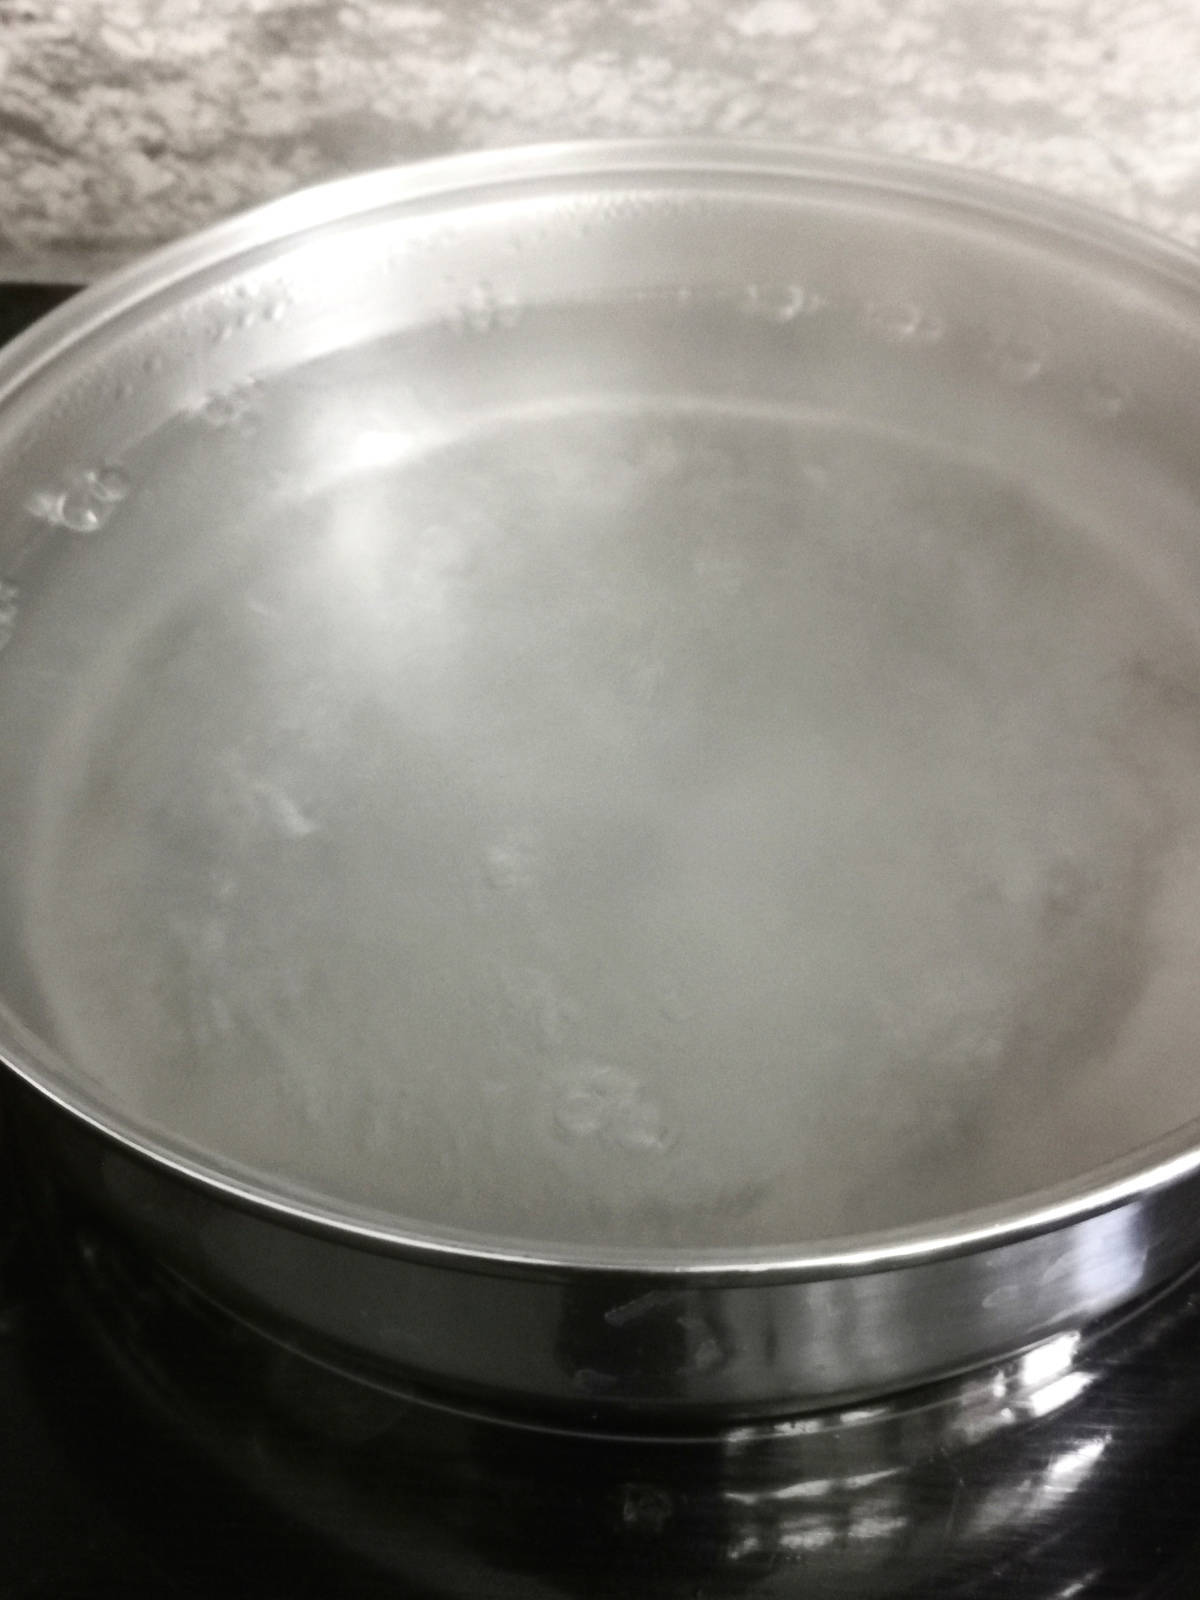 water boiling in a large pot on the stove.